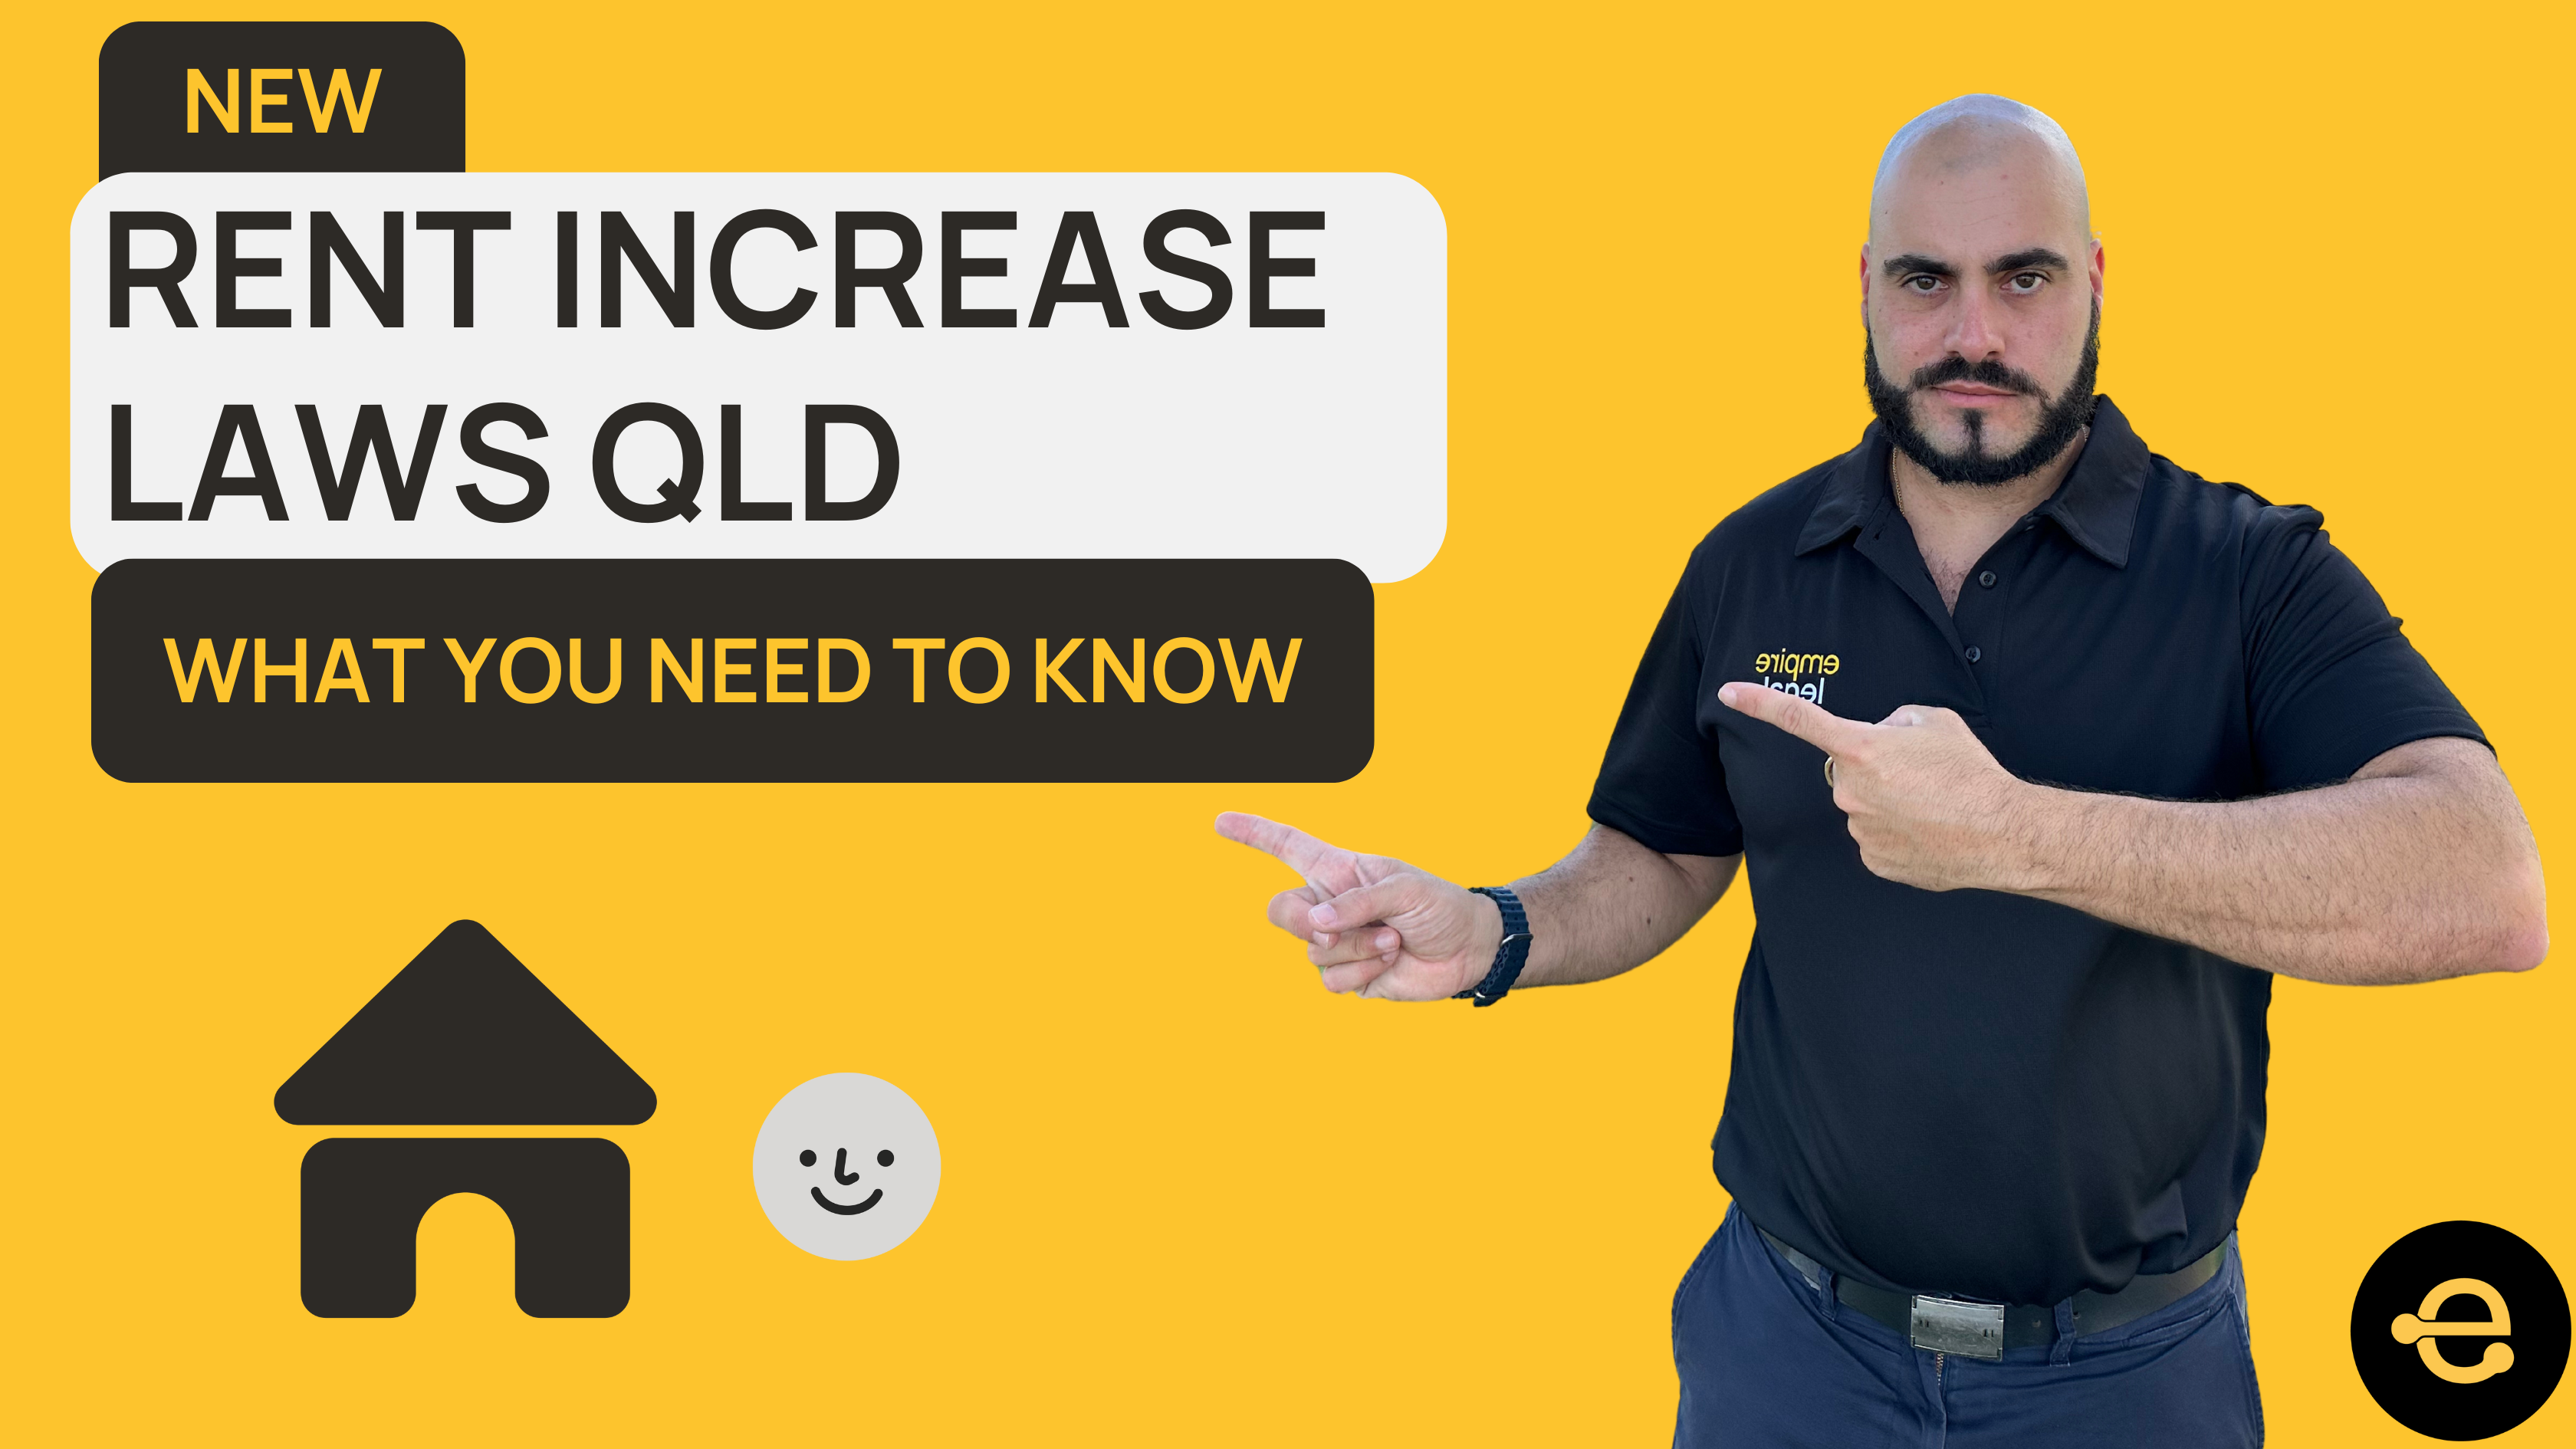 New rent increase laws QLD - what you need to know